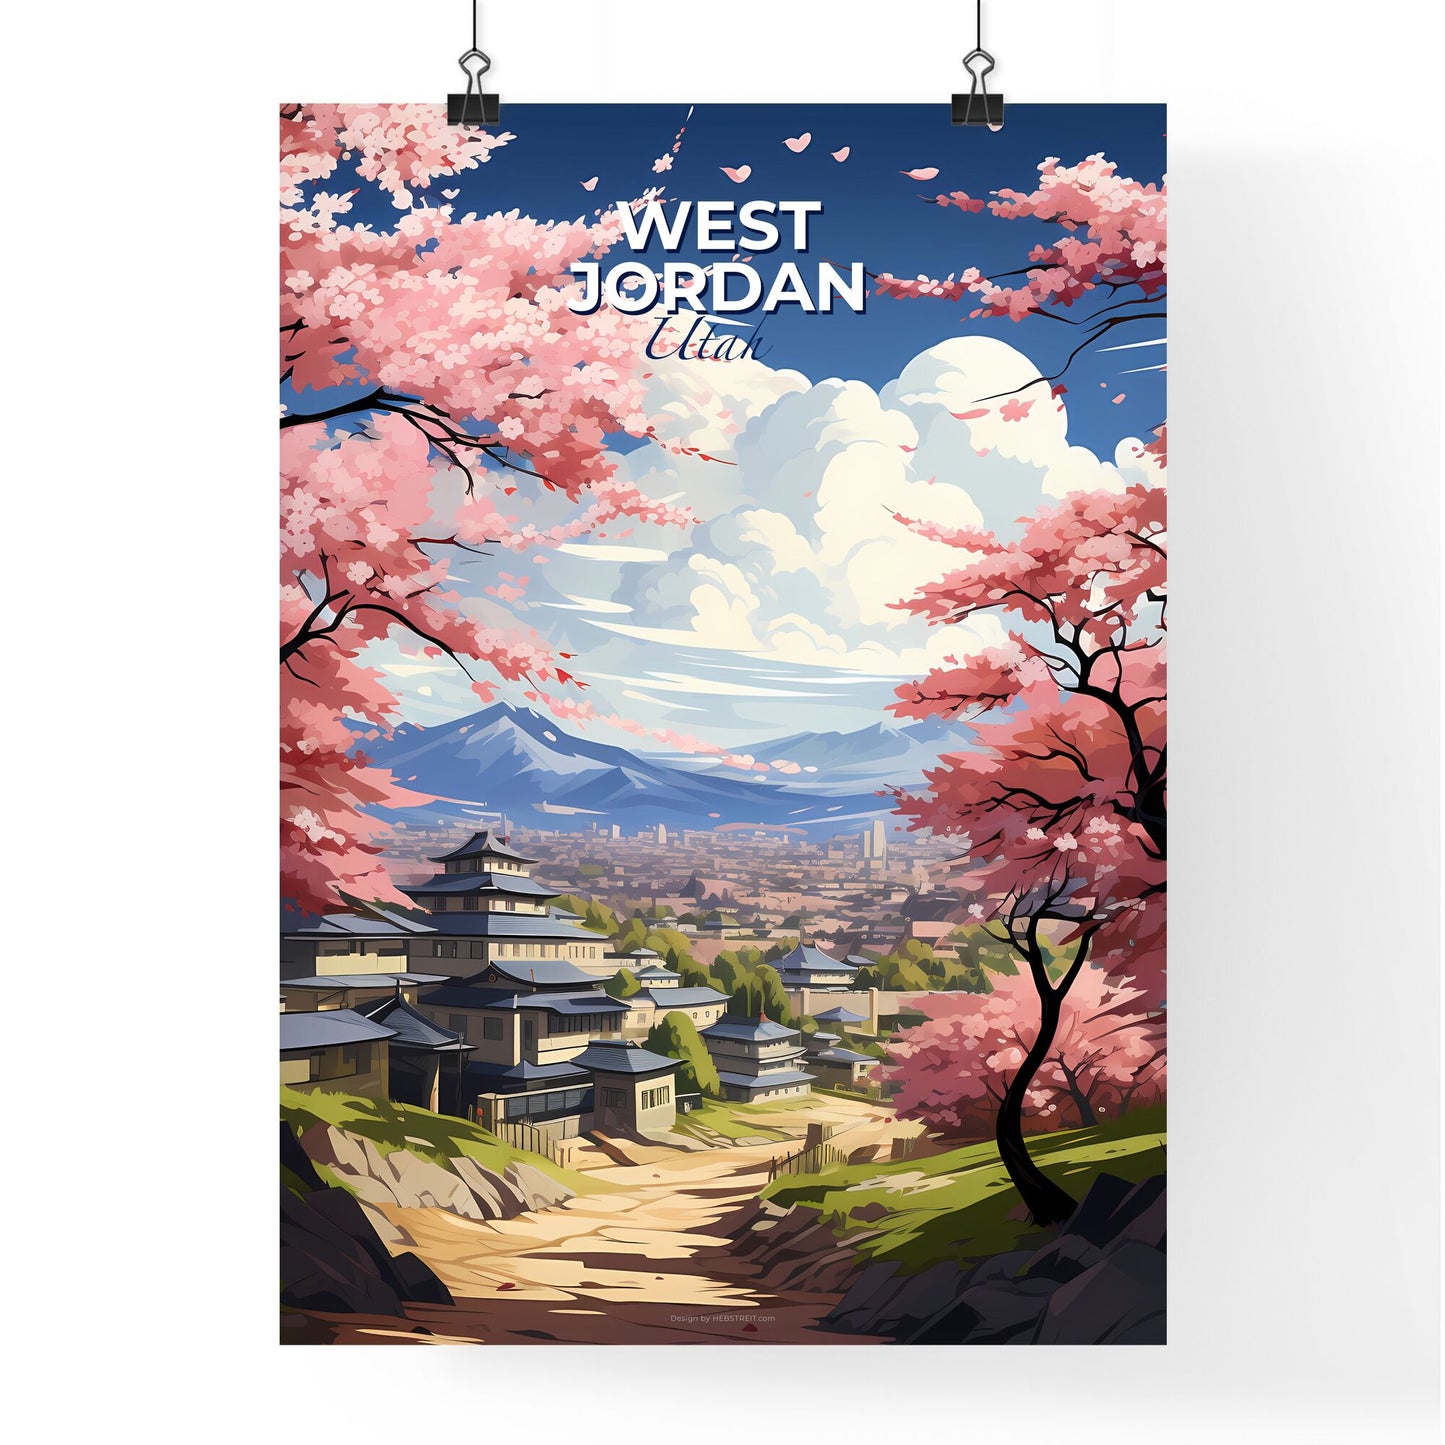 West Jordan, Utah, A Poster of a landscape with pink trees and buildings Default Title